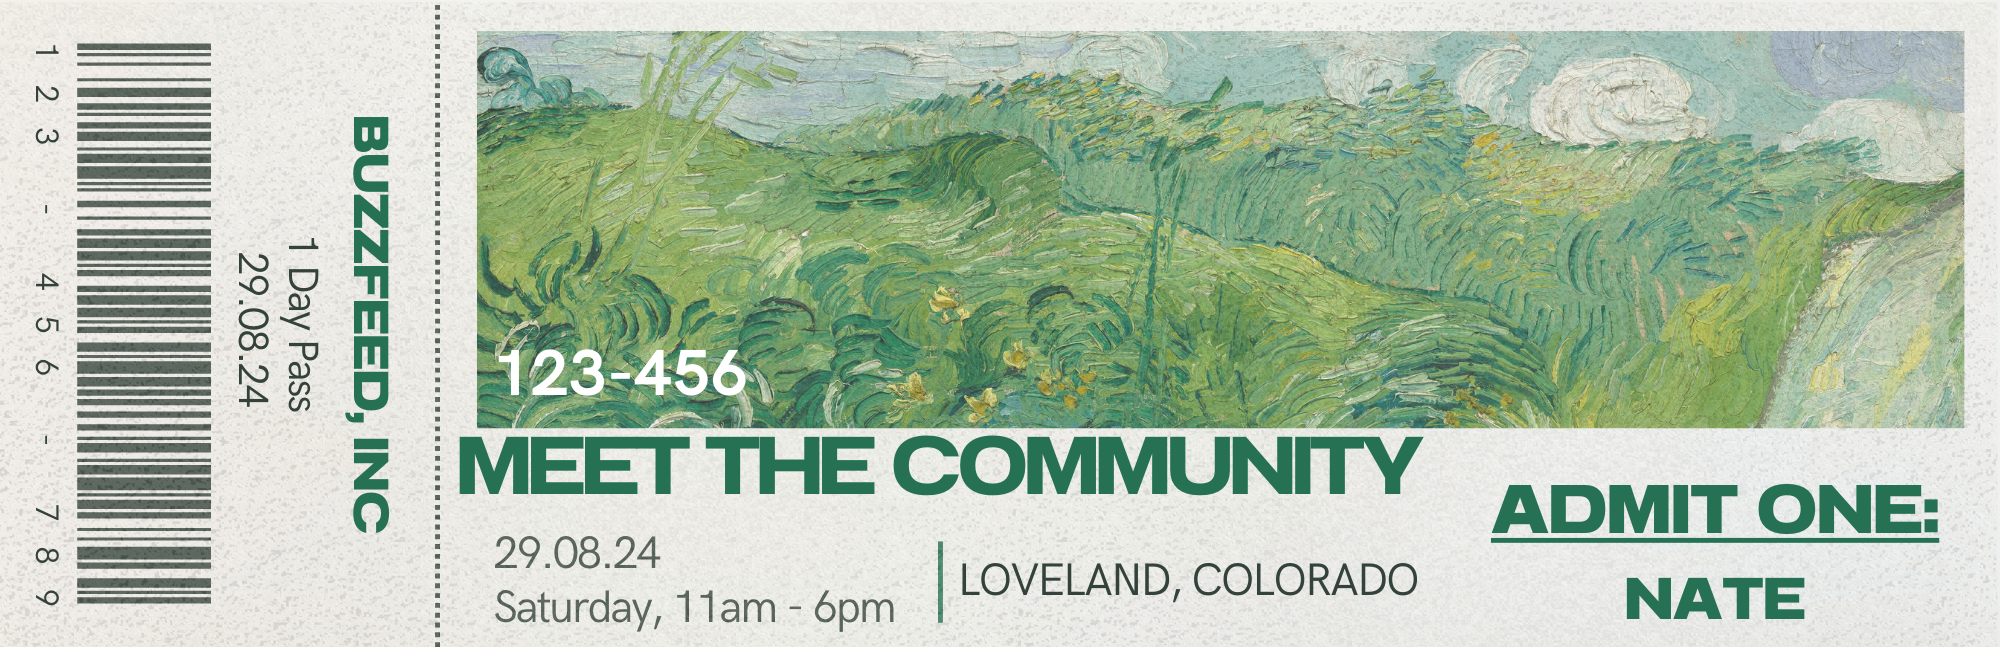 Event ticket for &#x27;MEET THE COMMUNITY&#x27; by BuzzFeed on 29.08.24 in Loveland, Colorado from 11am-6pm